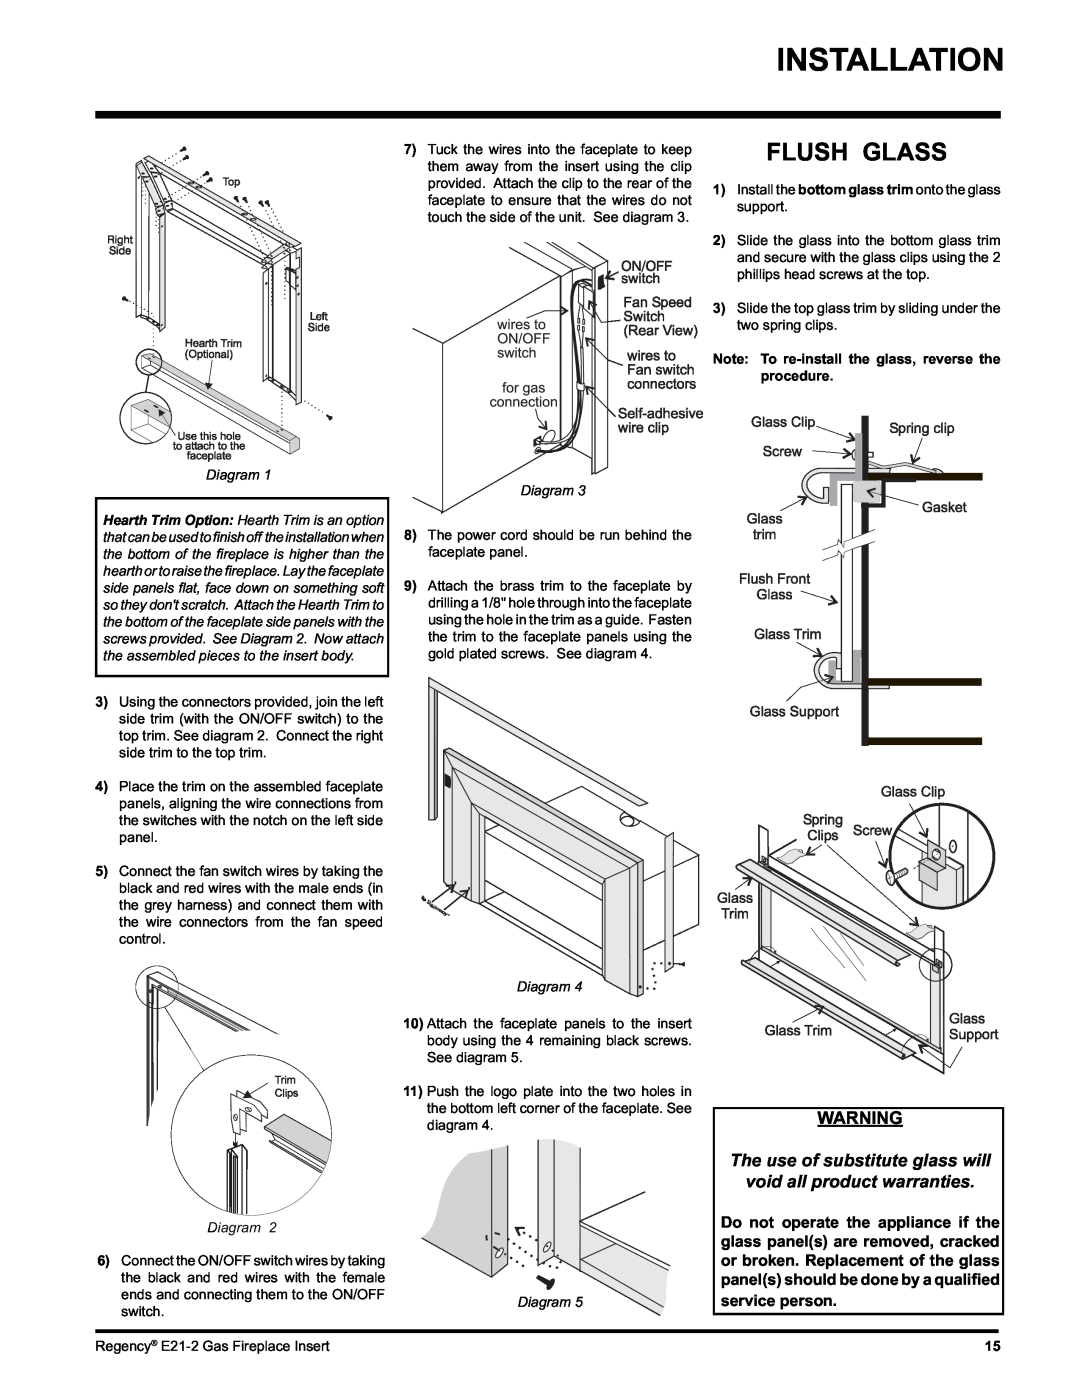 Regency E21-NG2 Installation, Flush Glass, The use of substitute glass will, void all product warranties, Diagram Diagram 